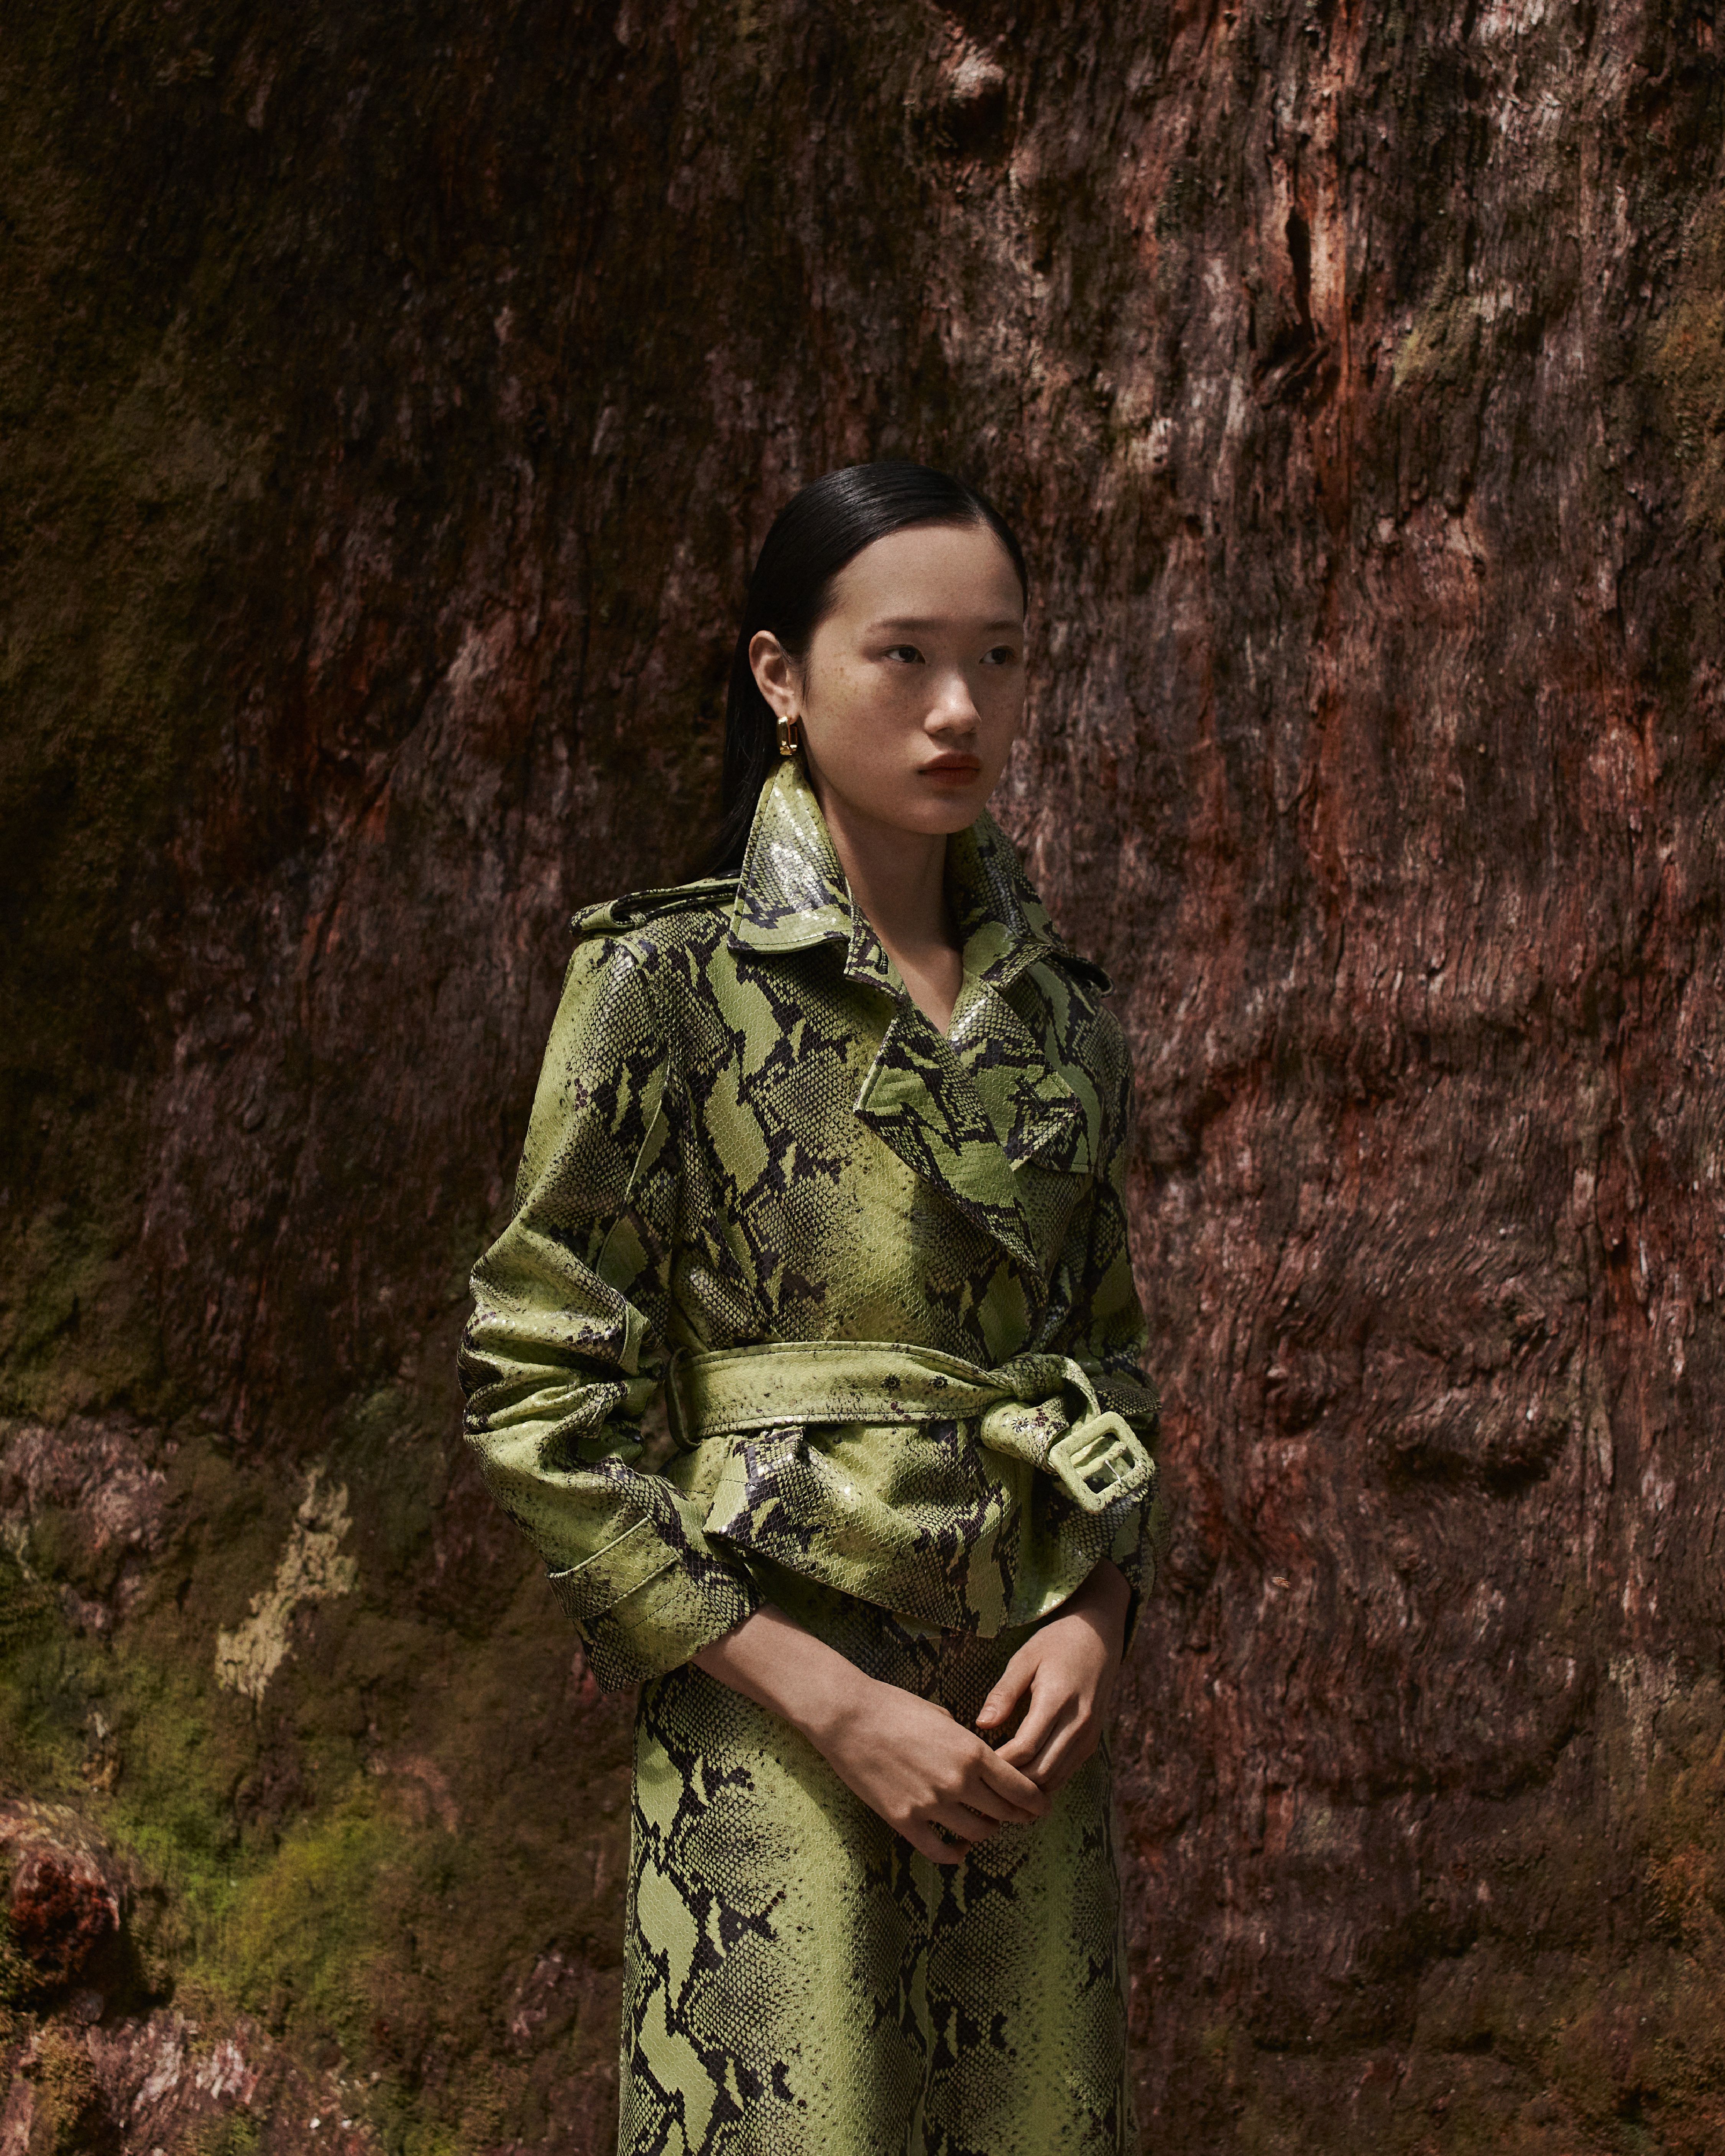 Venus He standing in front of a tree wearing a reptile-print leather trench coat